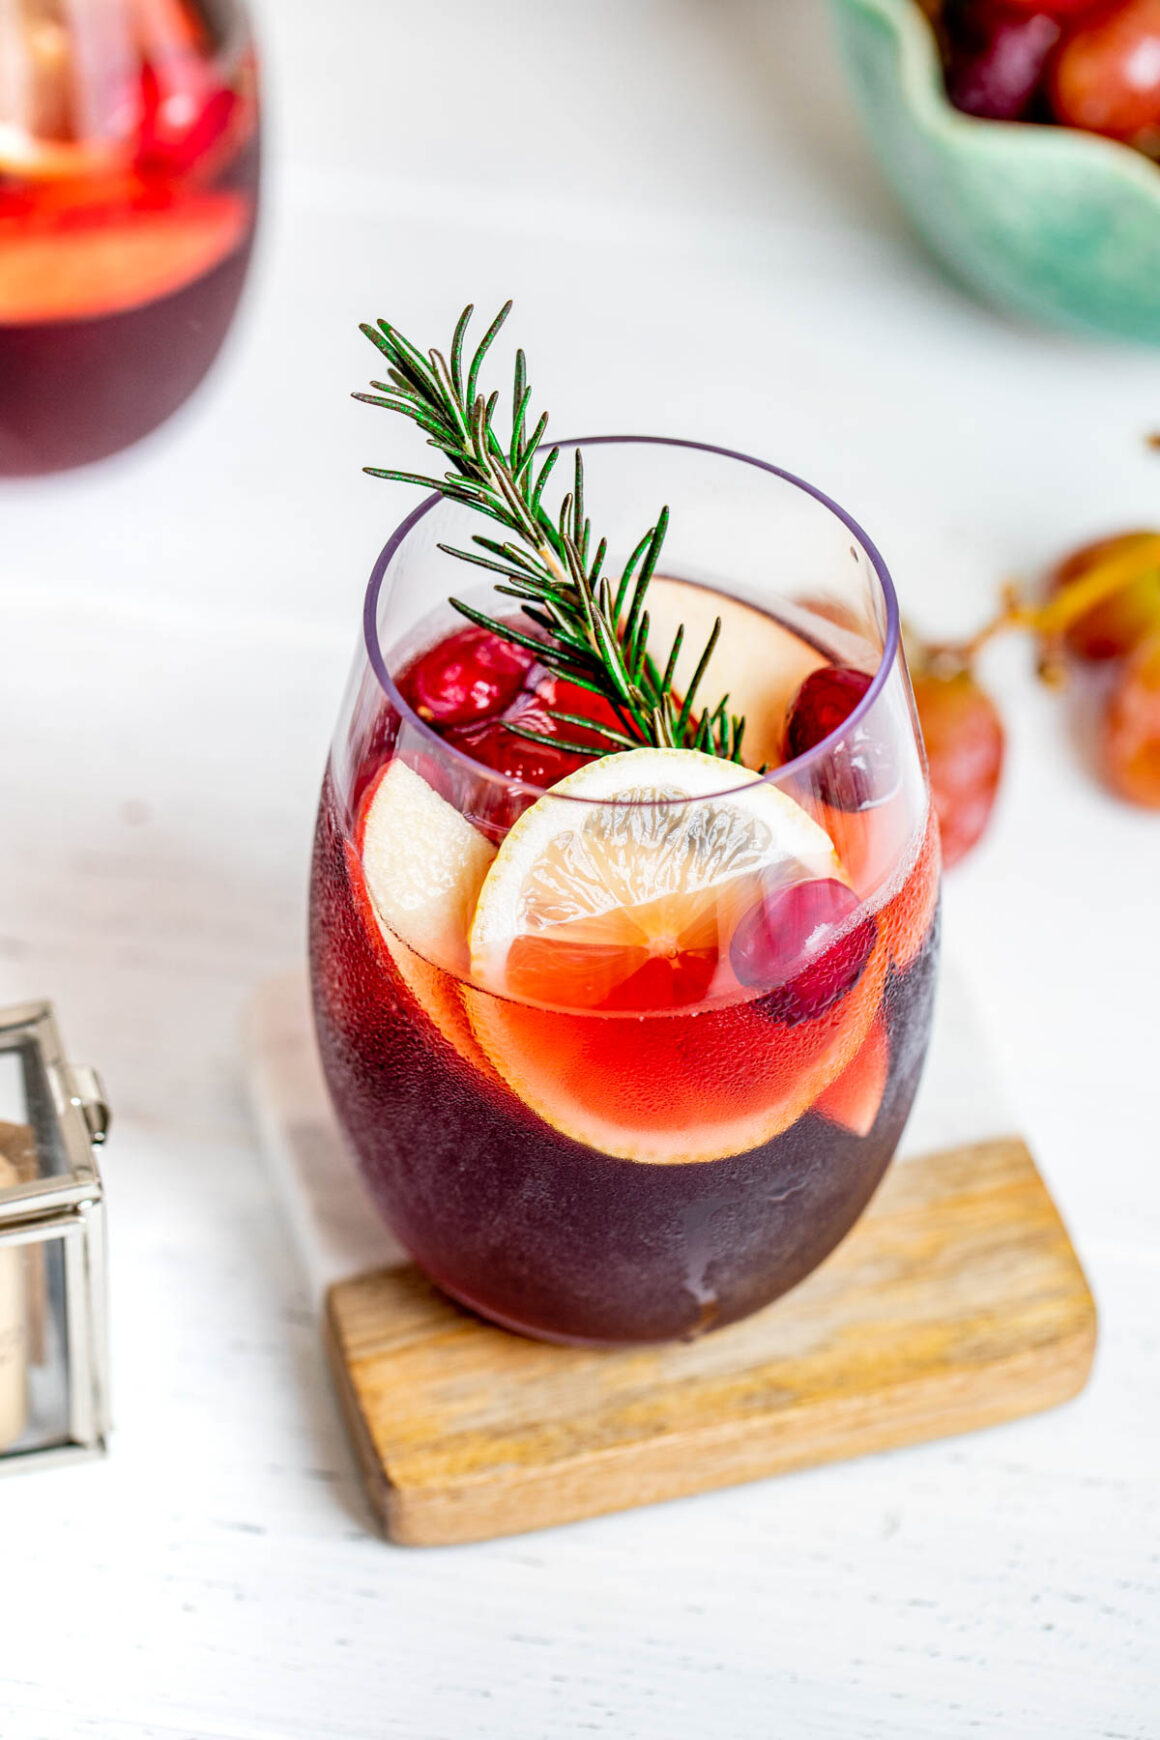 sangria has a rich history rooted in Spain. It is believed to have originated in the southern region of Andalusia.